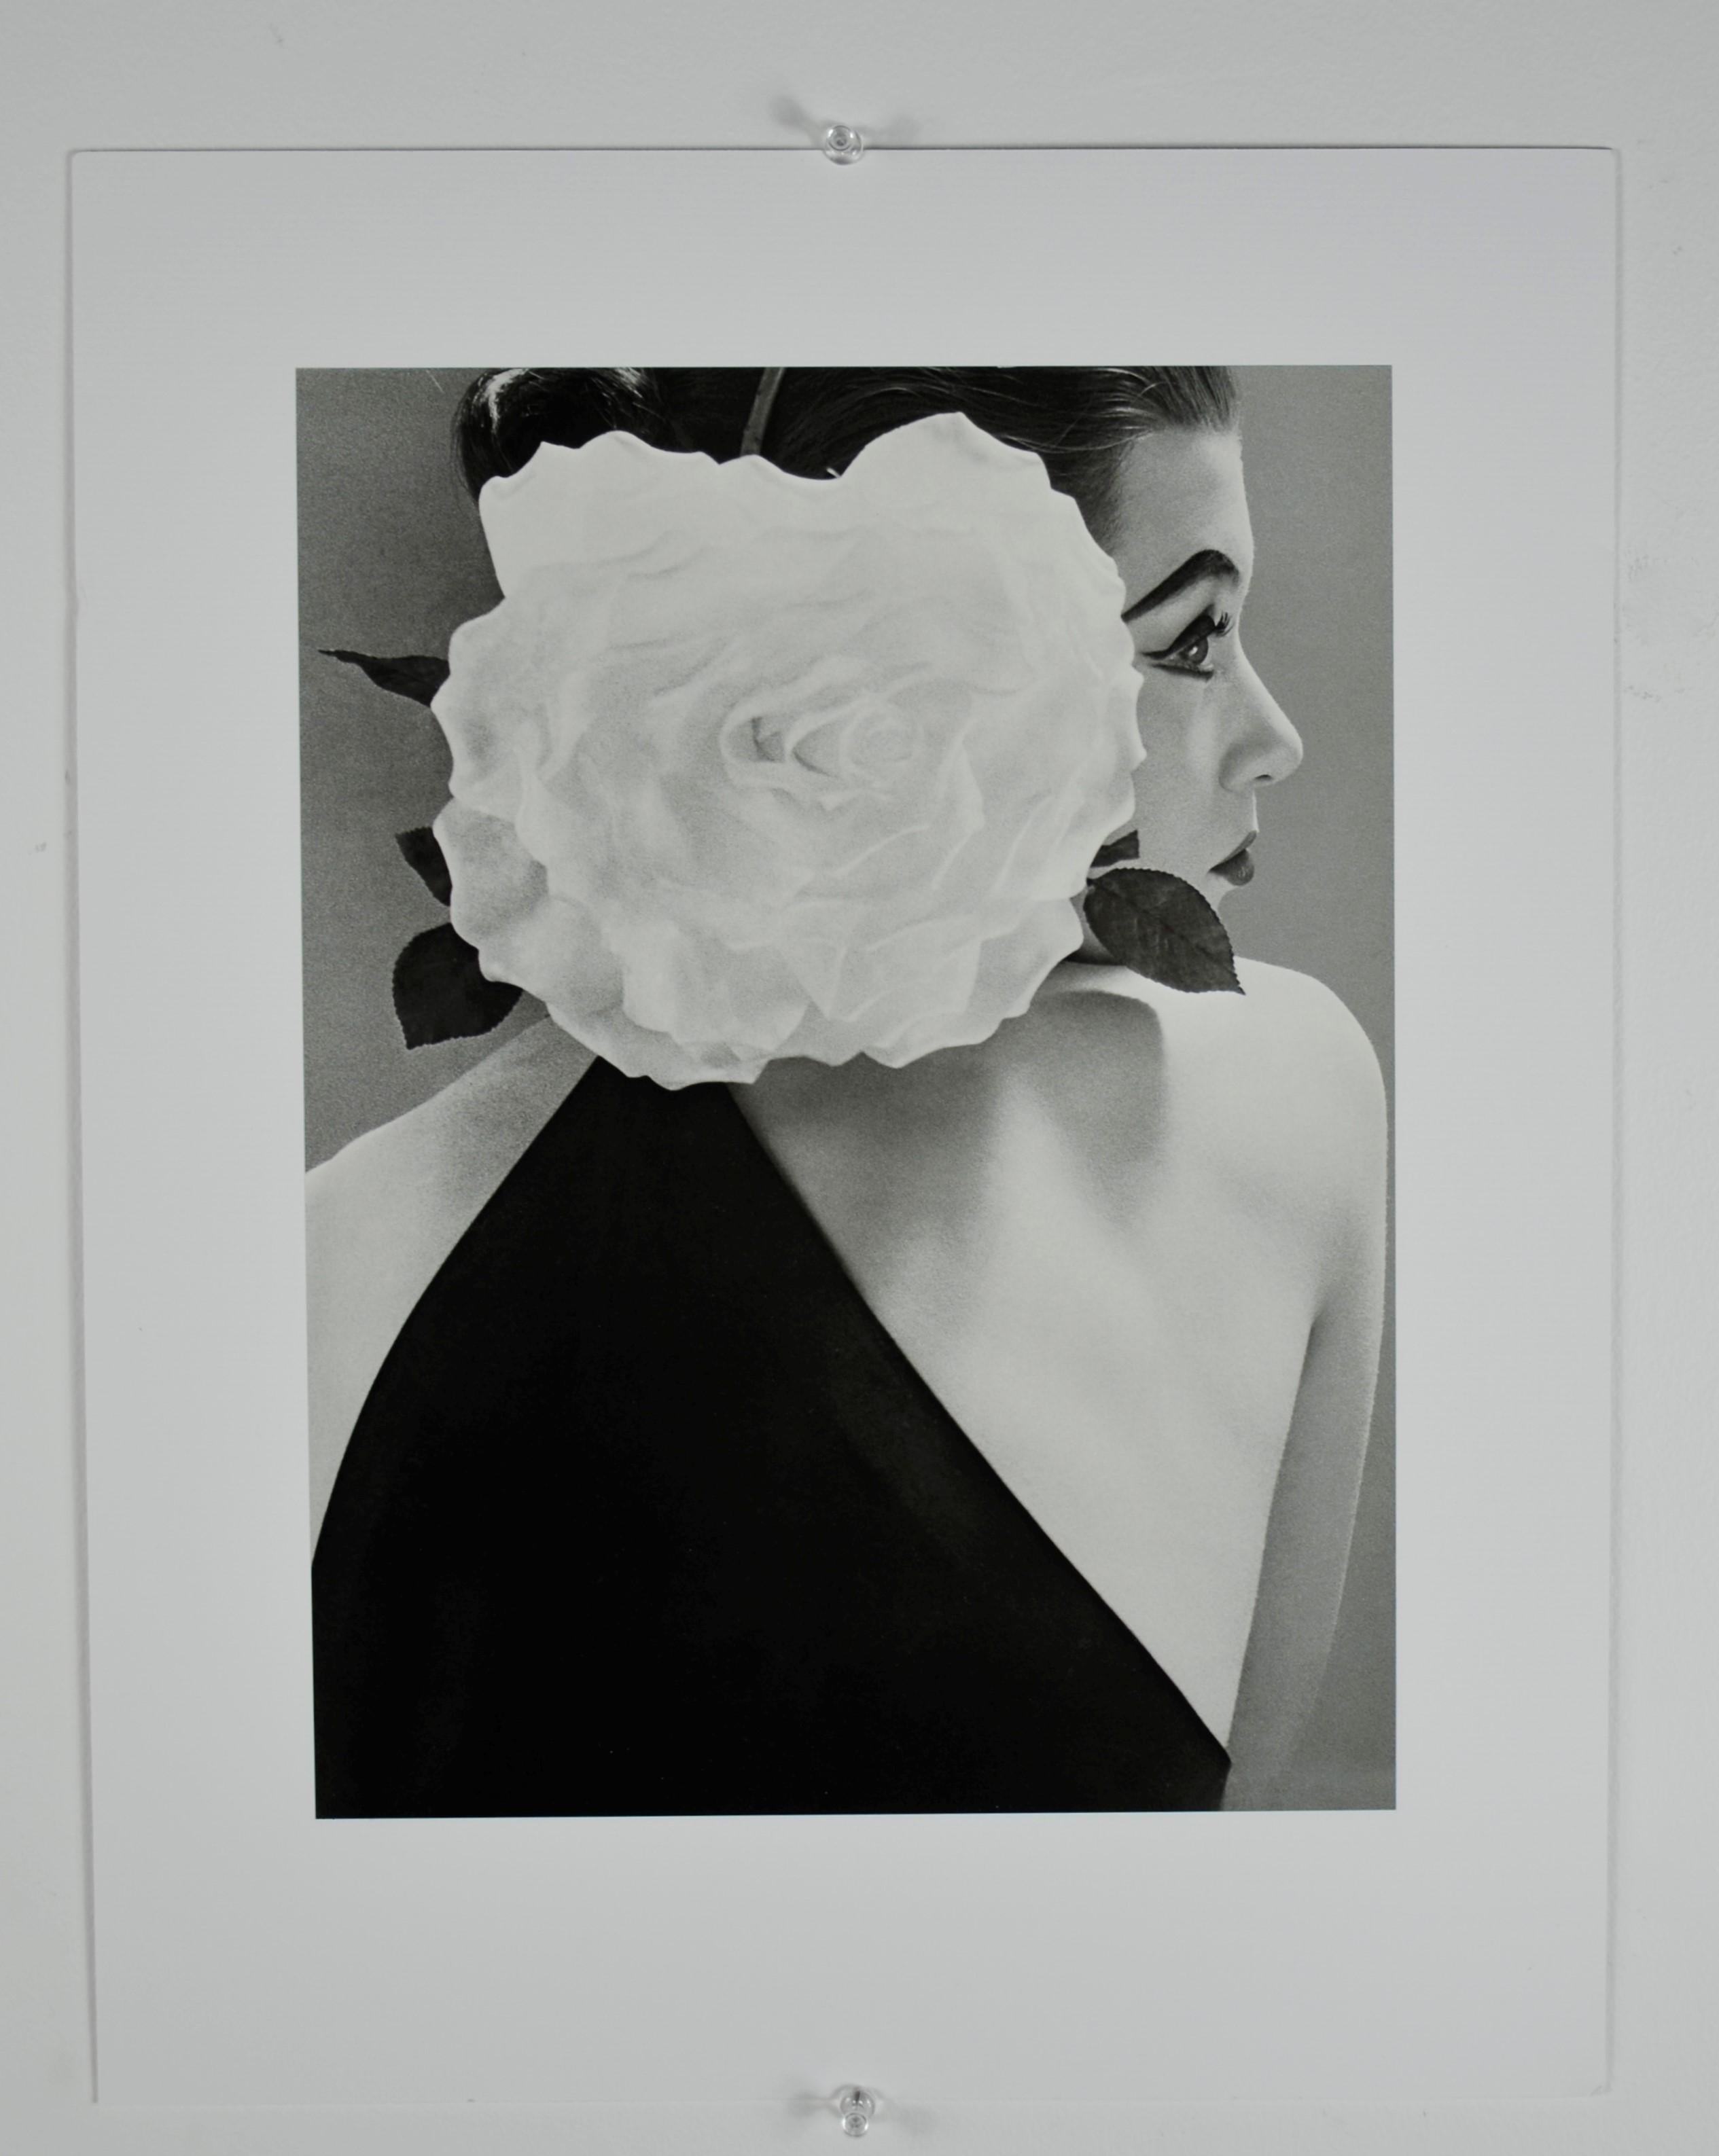 Offered is a black and white photograph by Richard Avedon entitled, “Barbara Mullen” 1951 Sheet-fed Gravure printed in the 1980s in France. The subject of the photograph, Barbara Mullen, was a very well known rough around the edges Irish/American